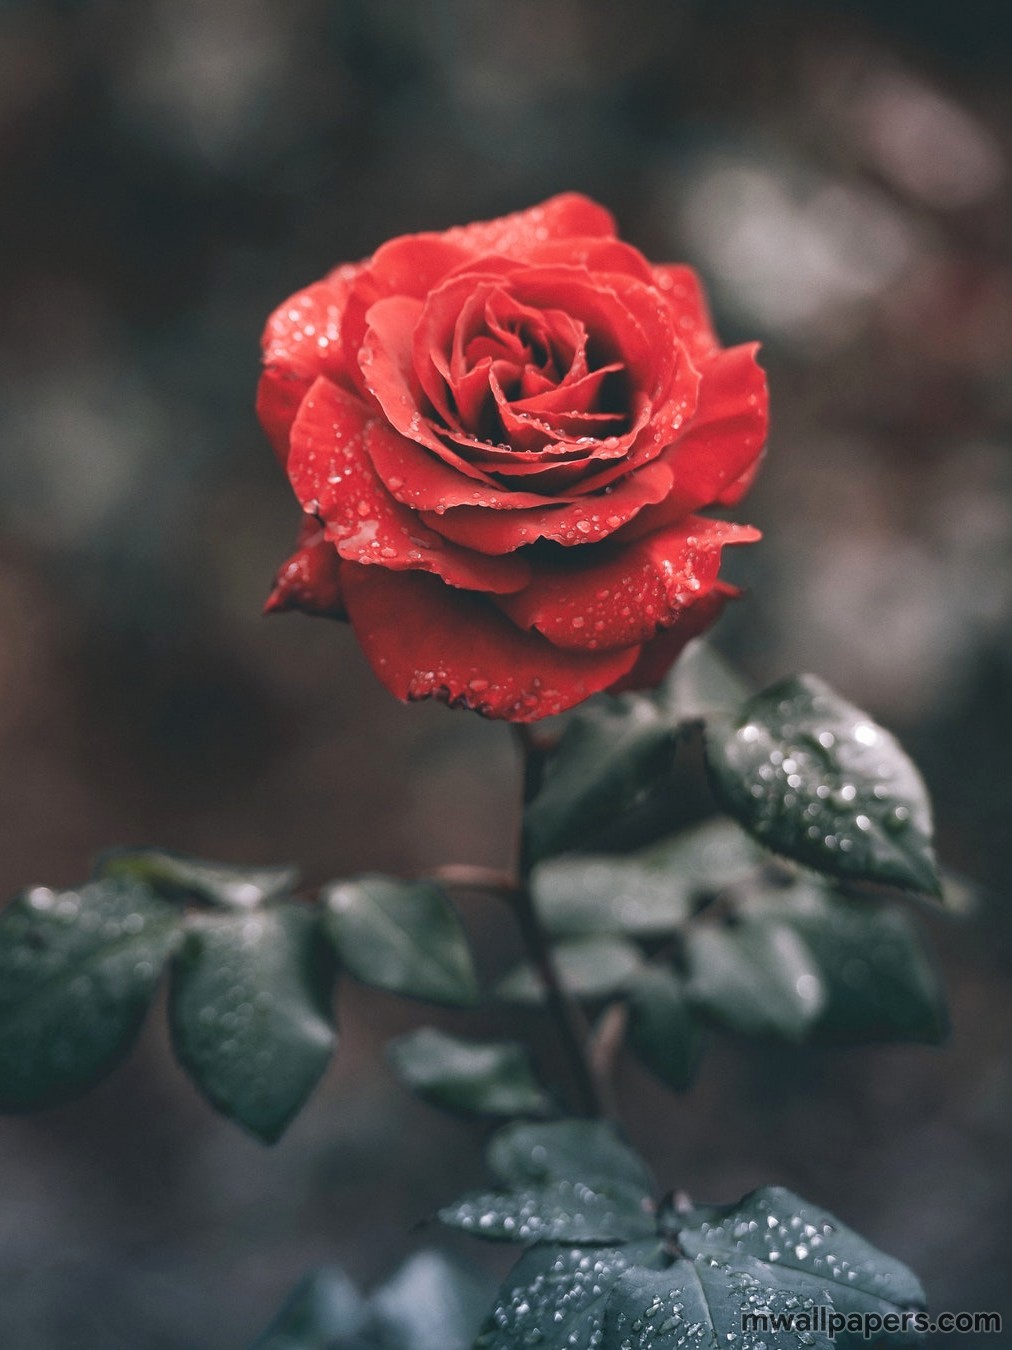 Download As Android/iphone Wallpaper - Roses Are Beautiful , HD Wallpaper & Backgrounds